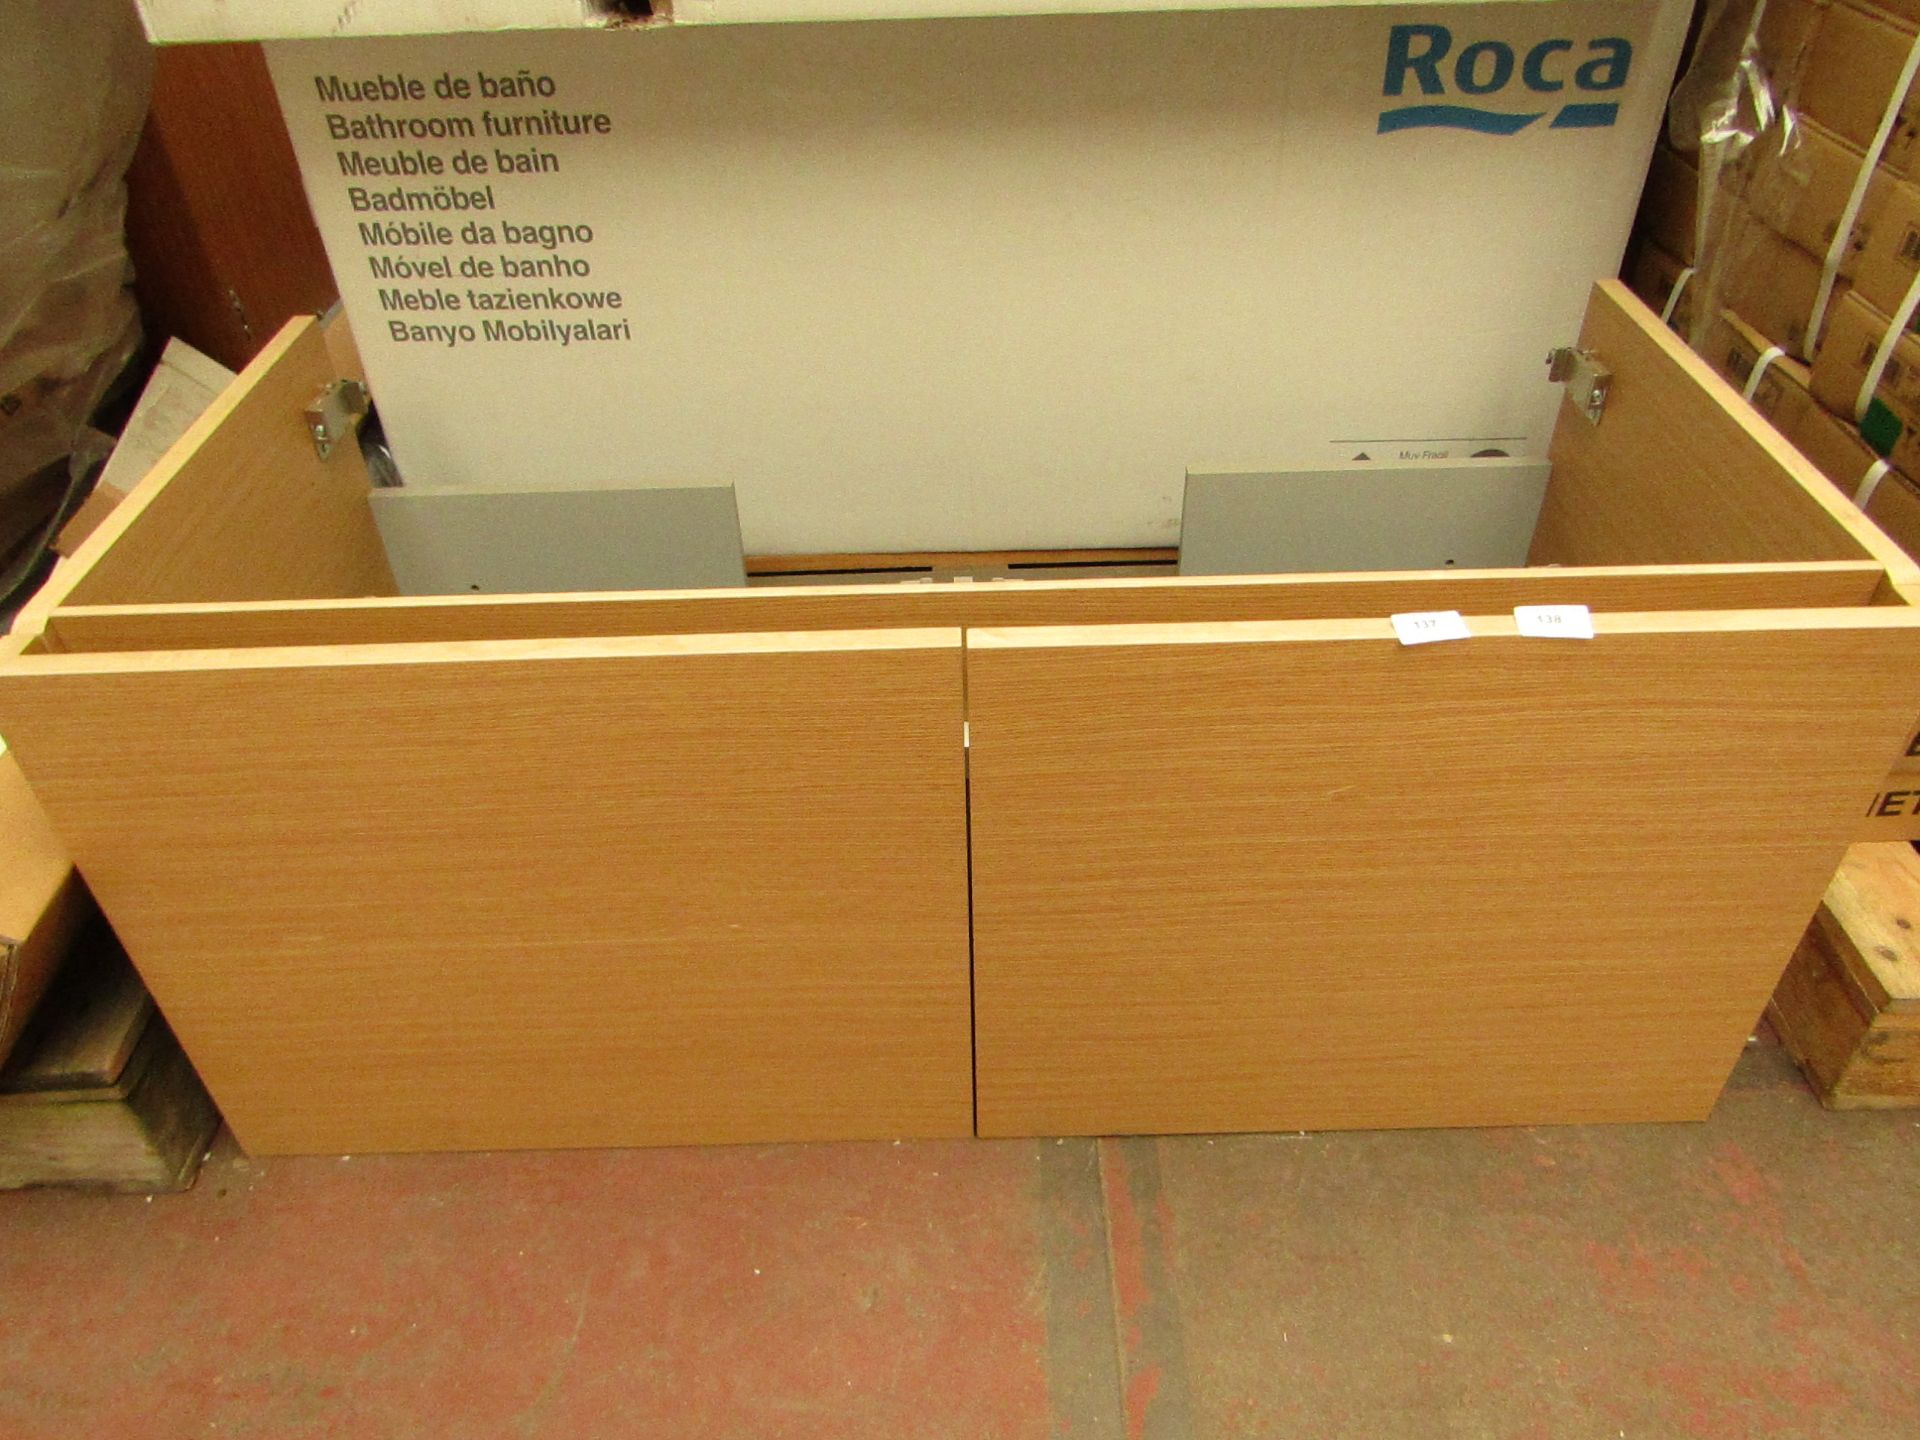 Roca 1085mm light up vanity bathroom unit with built in lighting, new and boxed. RRP Circa when